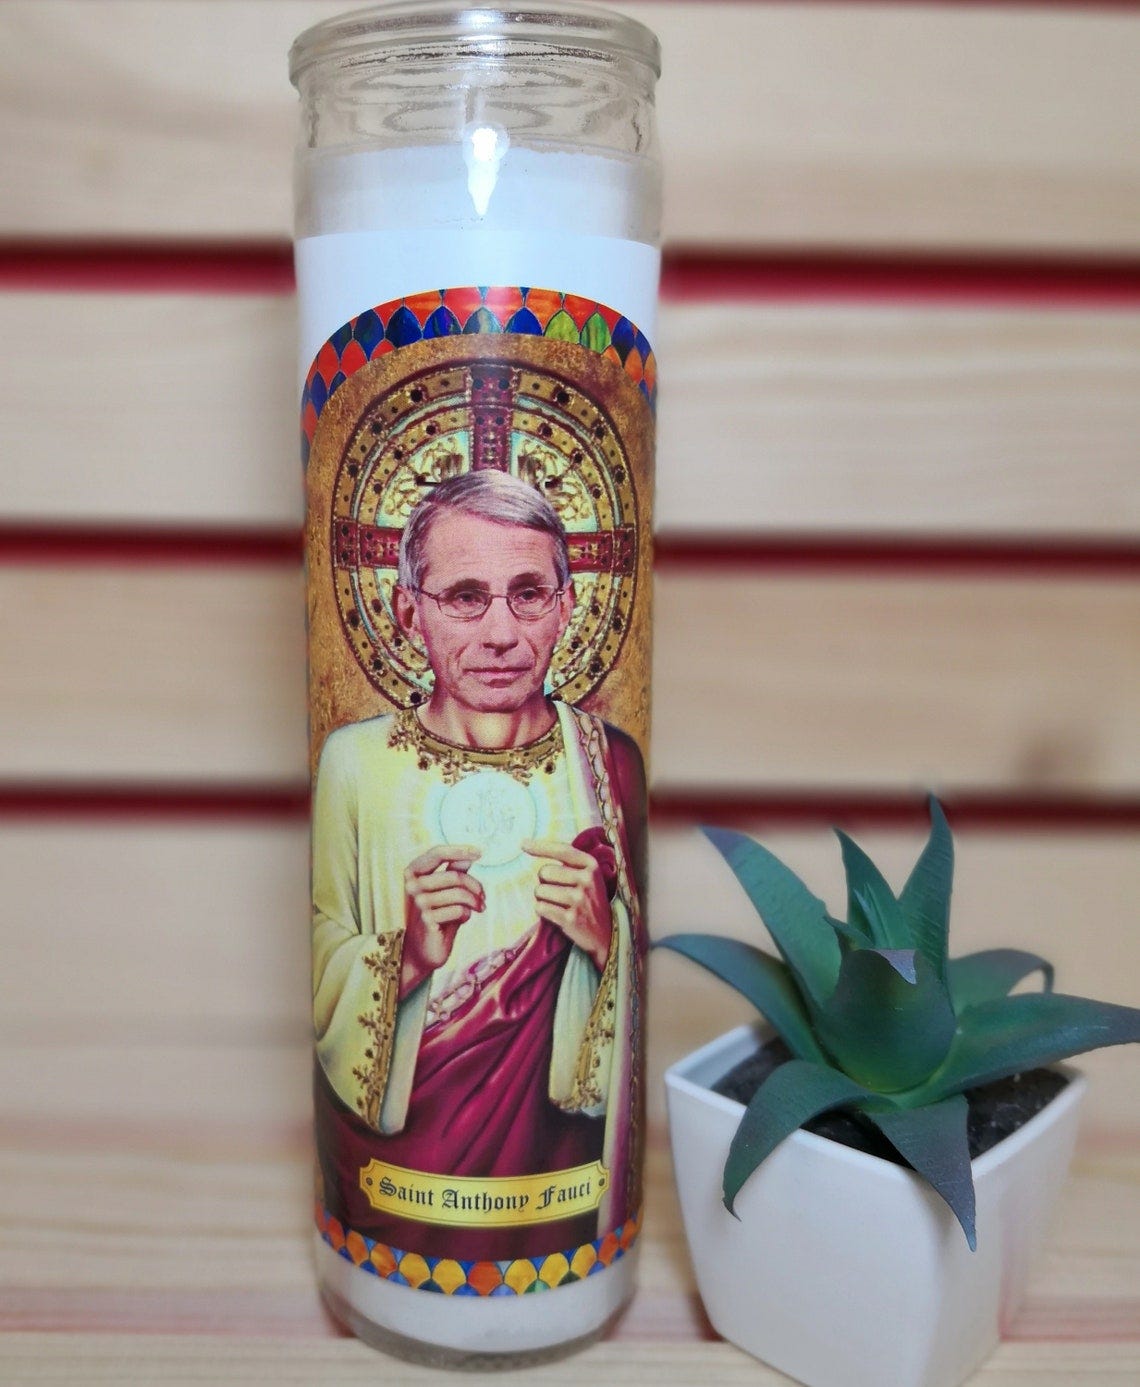 Image result from https://www.etsy.com/listing/904814529/dr-anthony-fauci-prayer-candle-saint?ga_order=most_relevant&frs=1